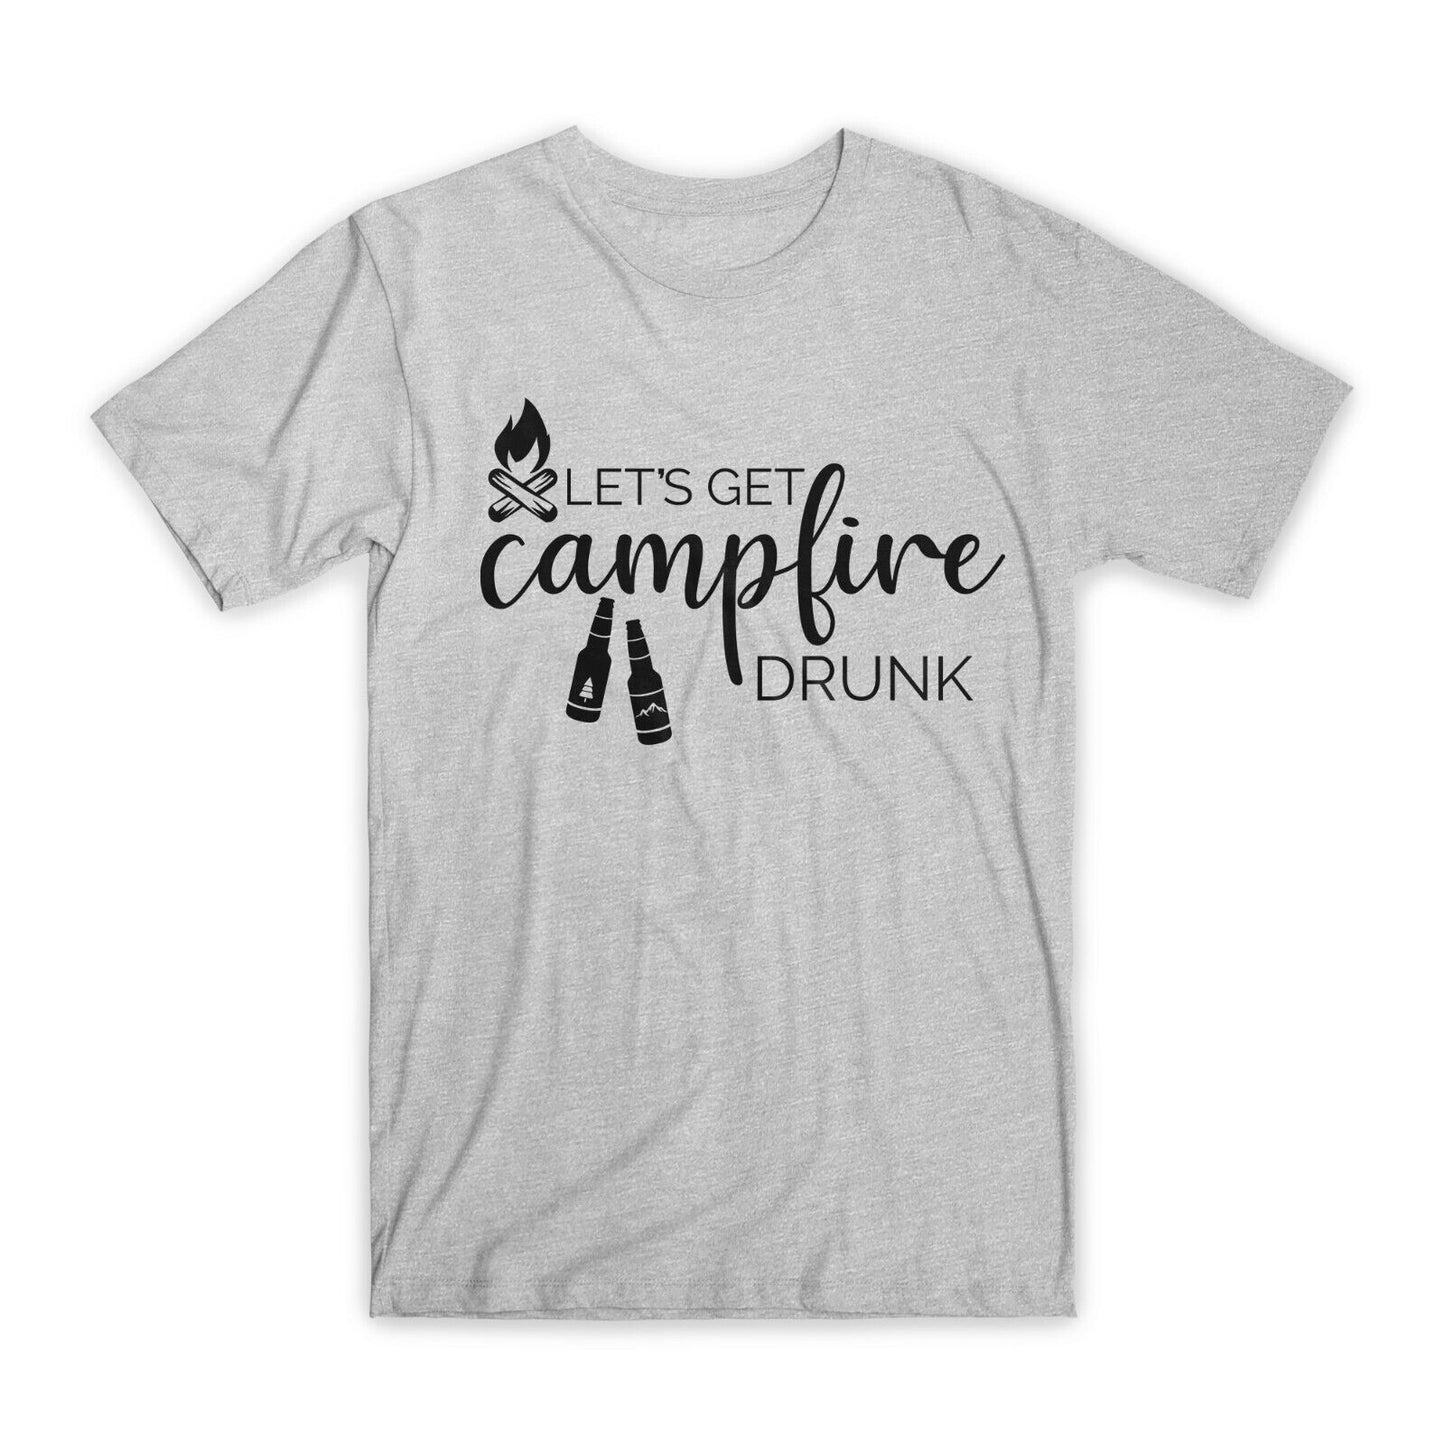 Let's Get Campfire Drunk T-Shirt Premium Soft Cotton Funny Tees Novelty Gift NEW